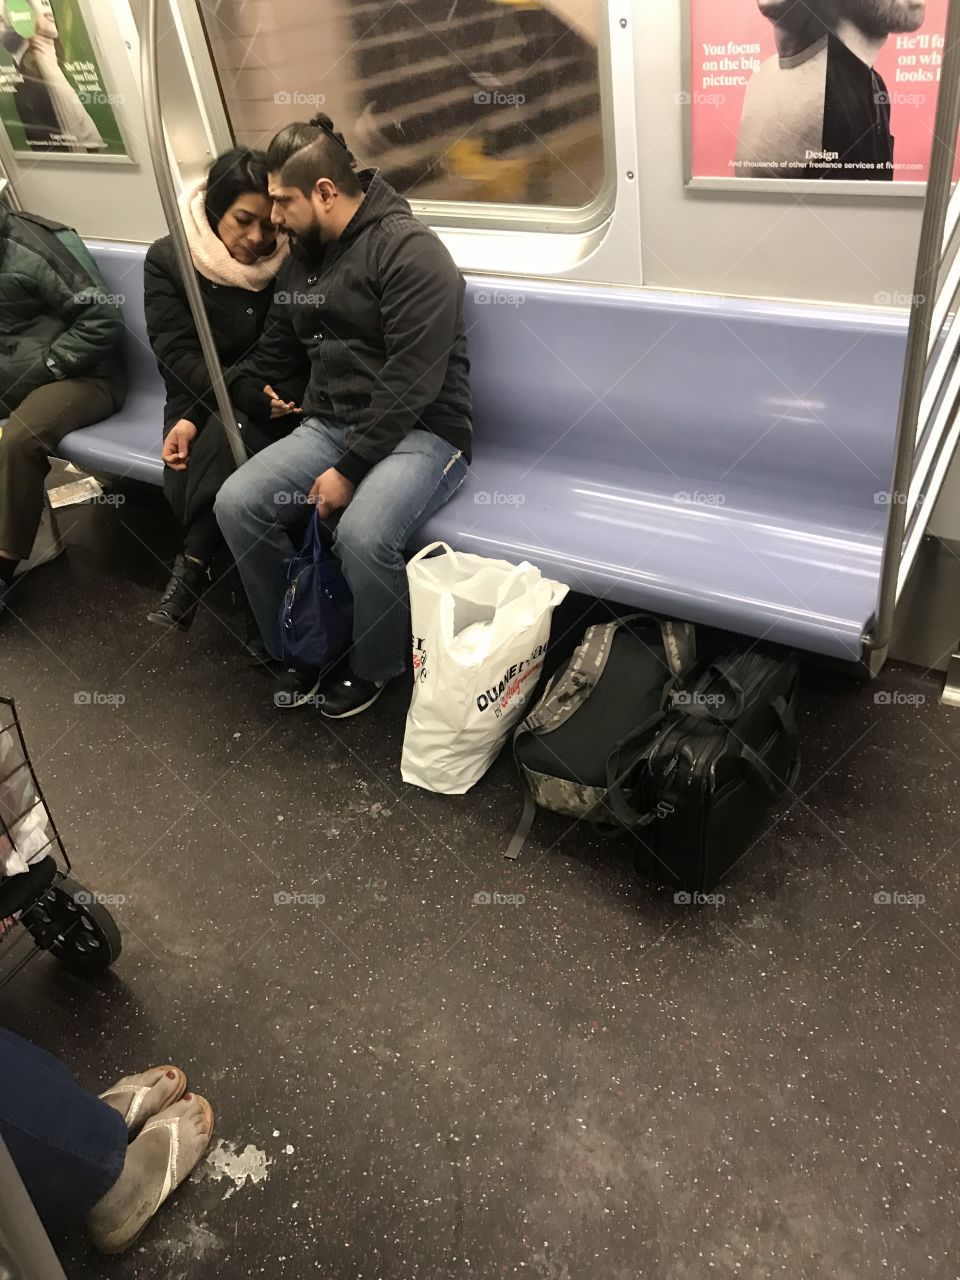 Snuggle bunnies on the uptown Queens bound E train at 2:25 AM. “All our dreams can come true if we have the courage to pursue them.” Walt Disney